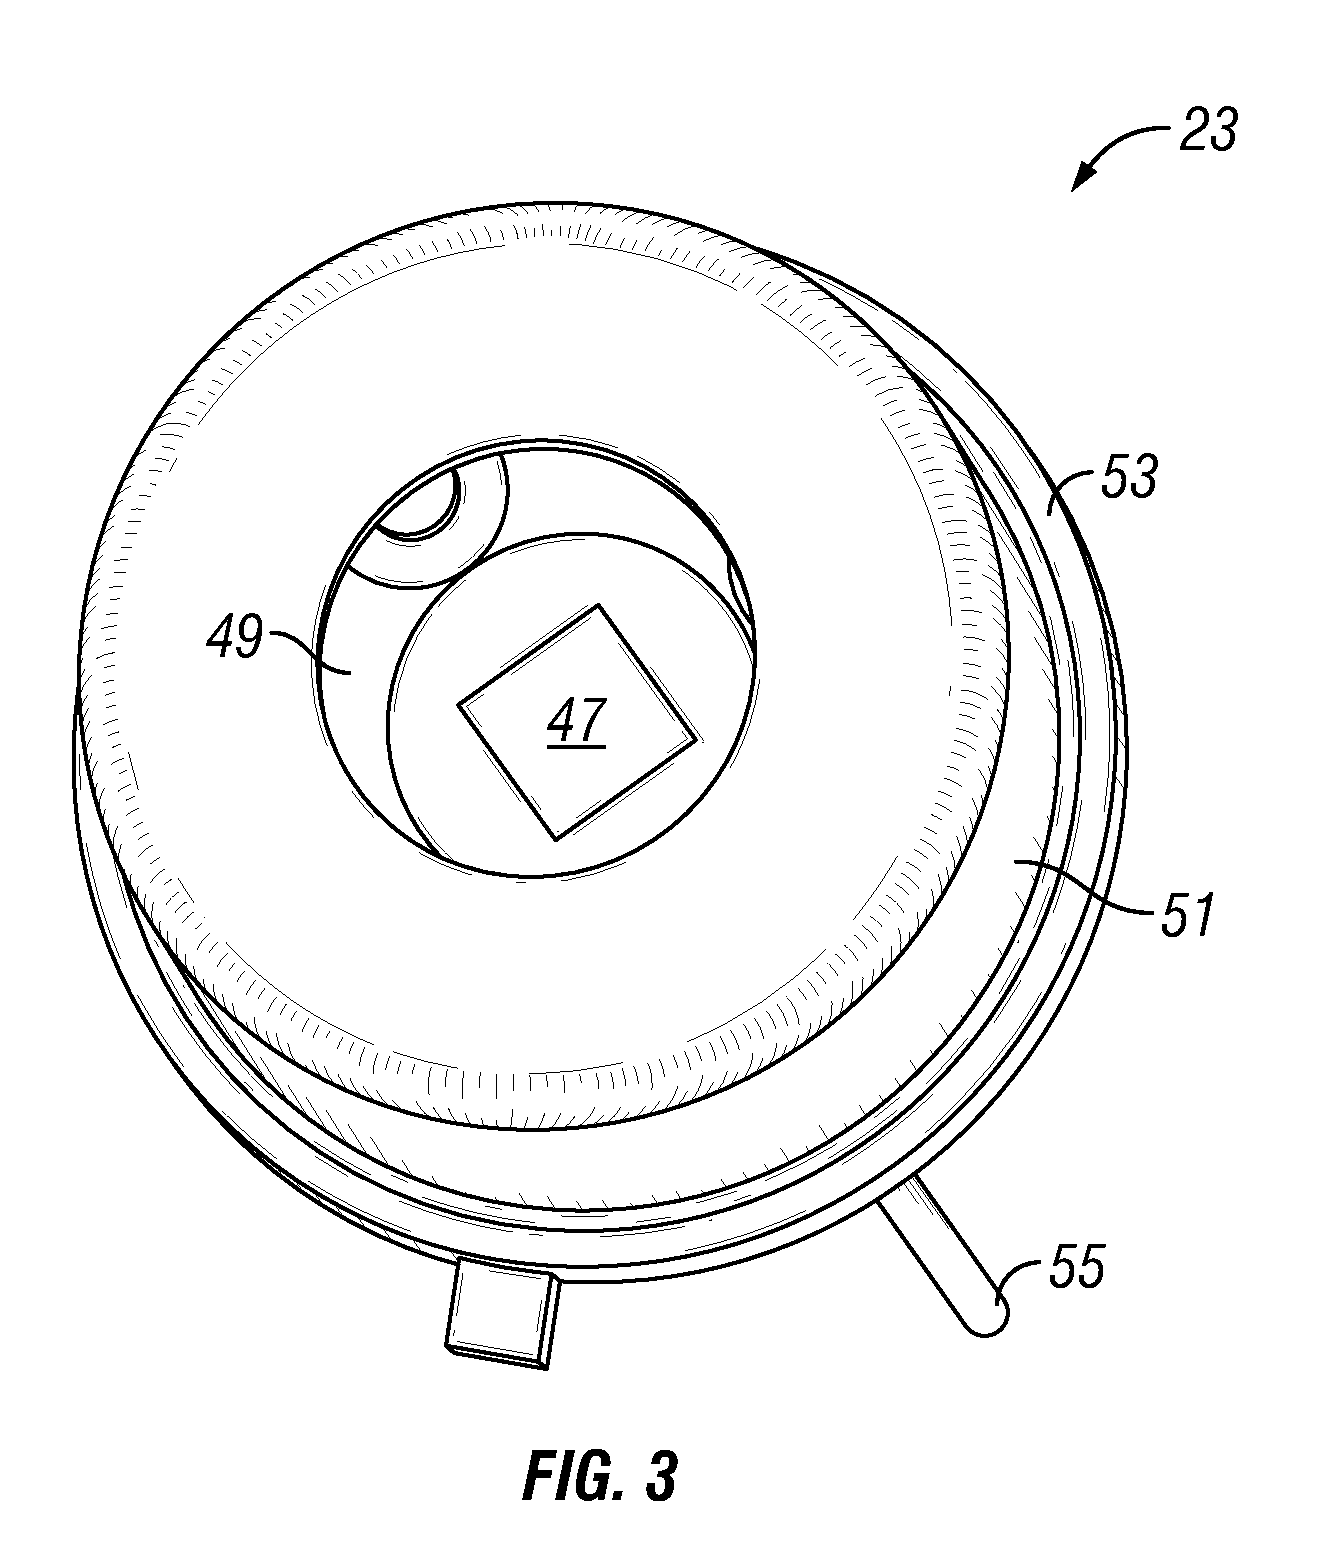 Apparatus and method for non-invasive measurement of a substance within a body